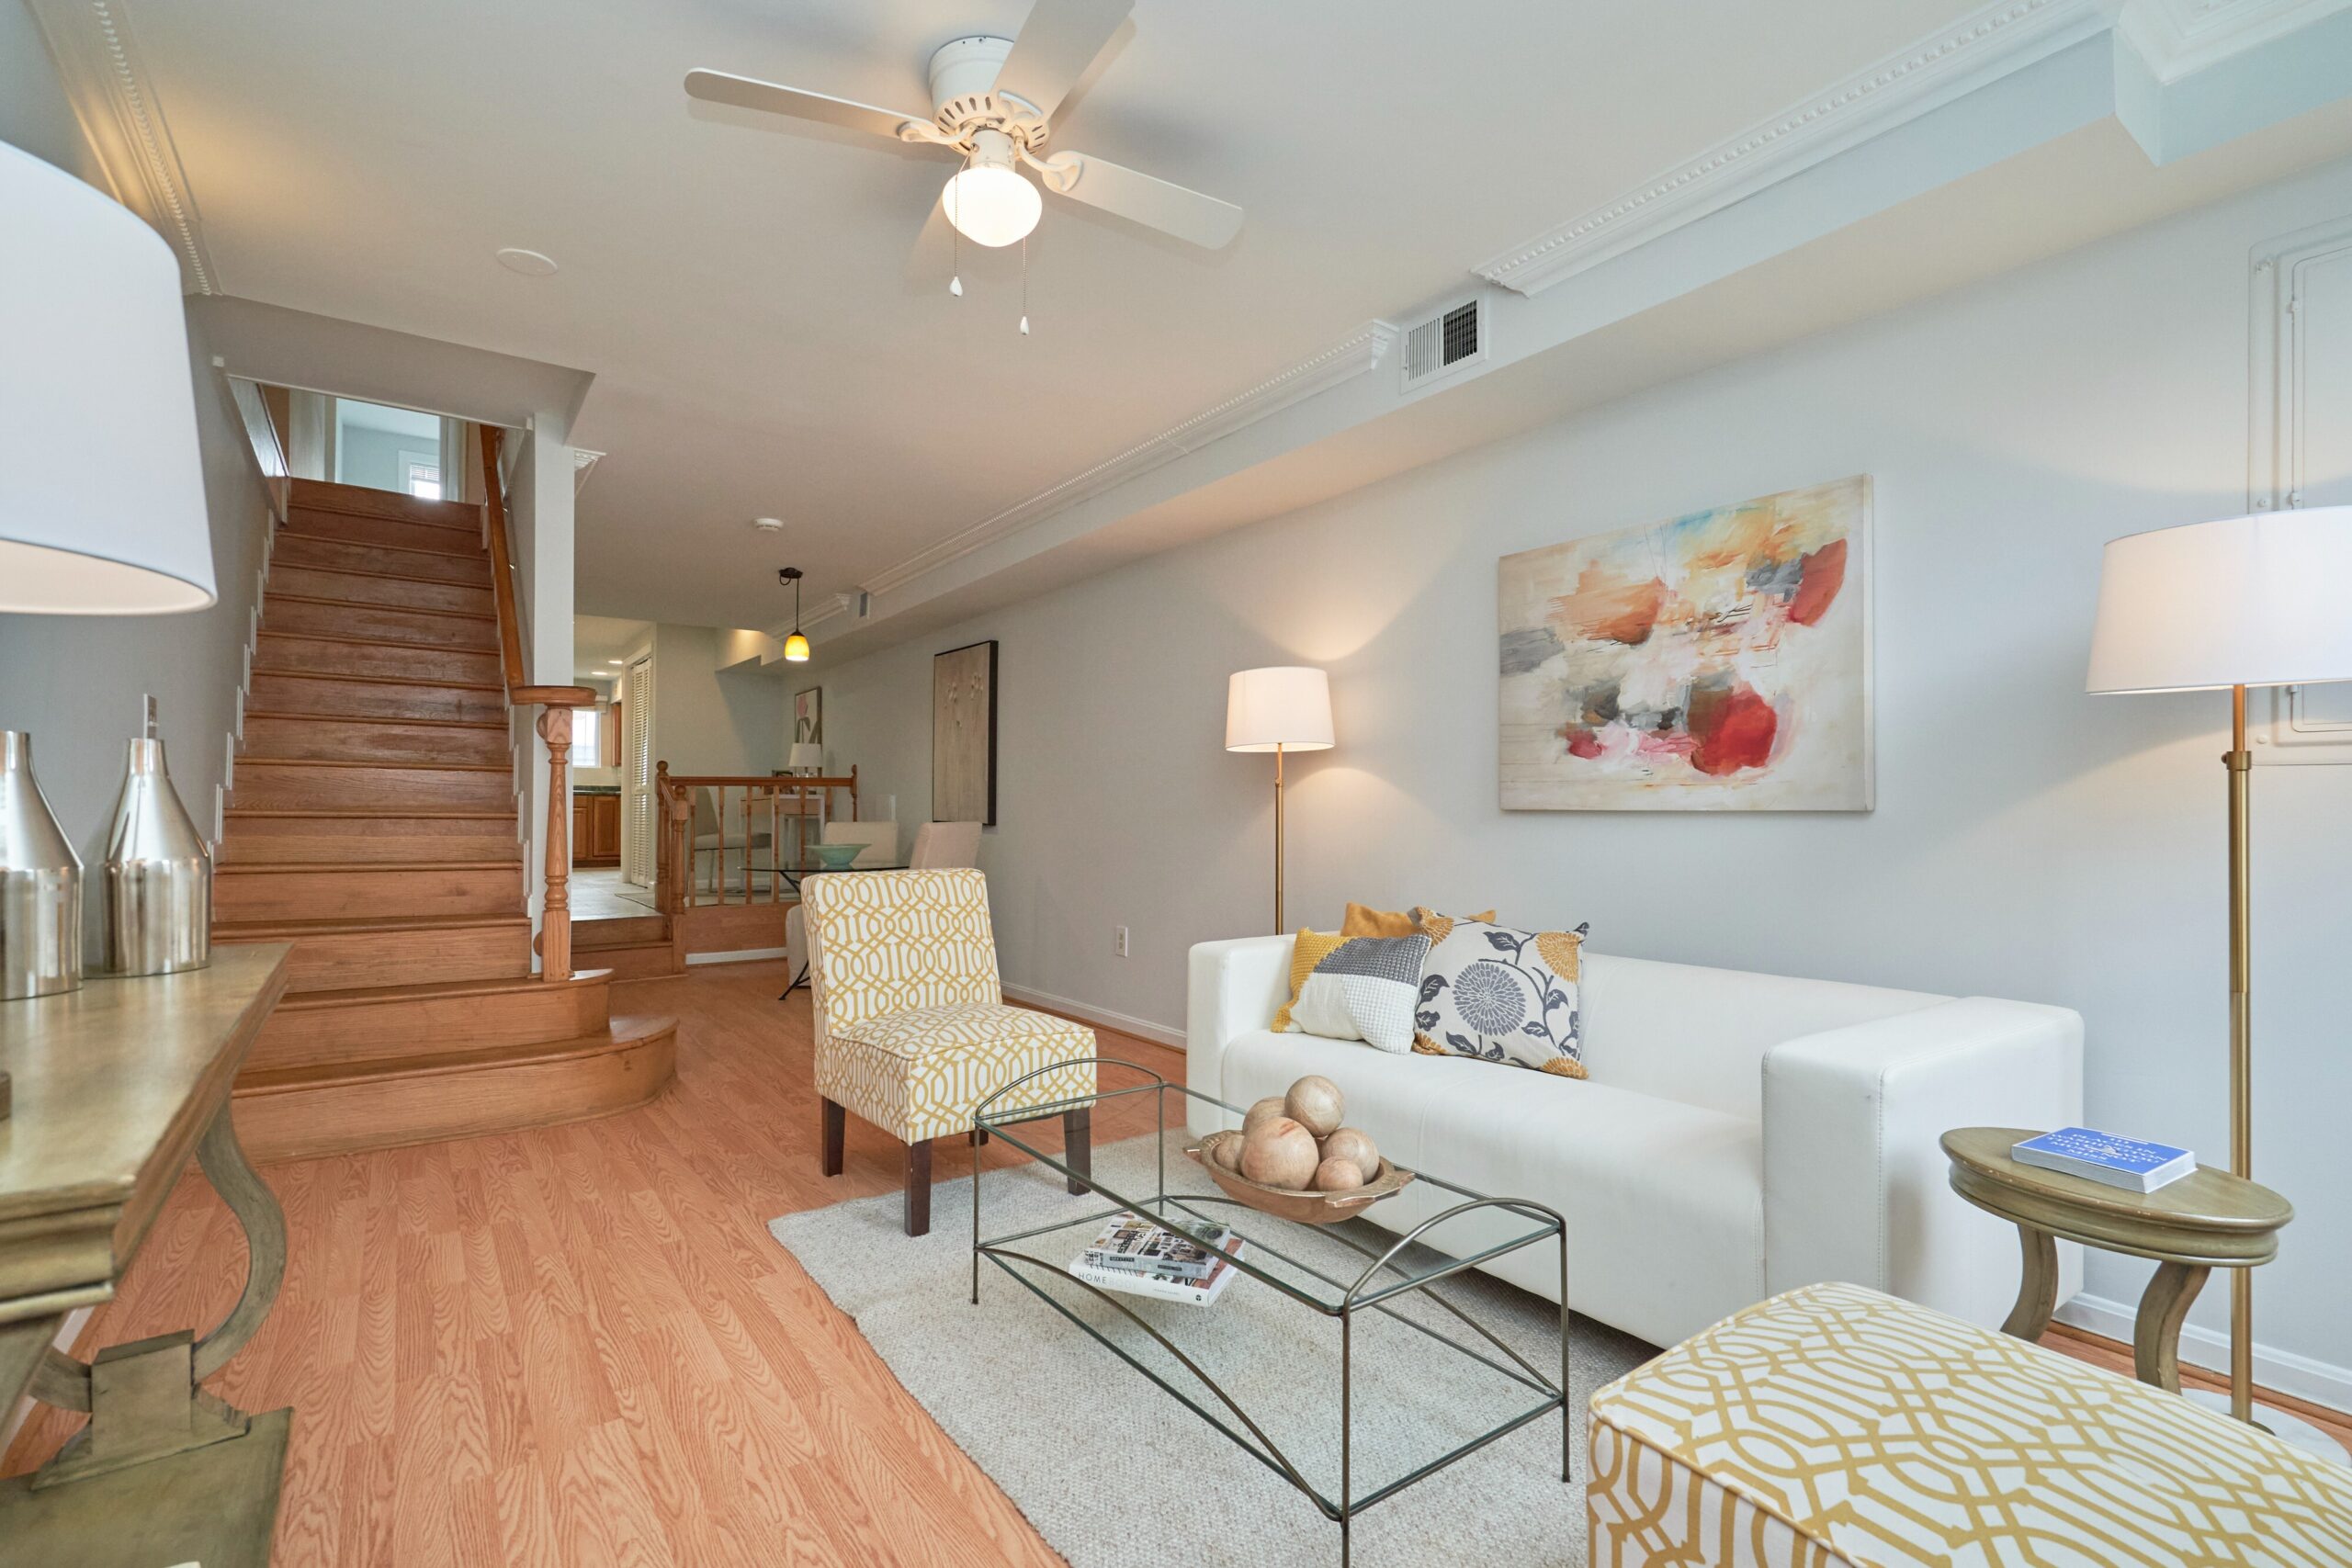 Professional interior photo of 1313 K Street SE, Washington, DC - showing the living room inside the front door and the staircase leading to the second floor